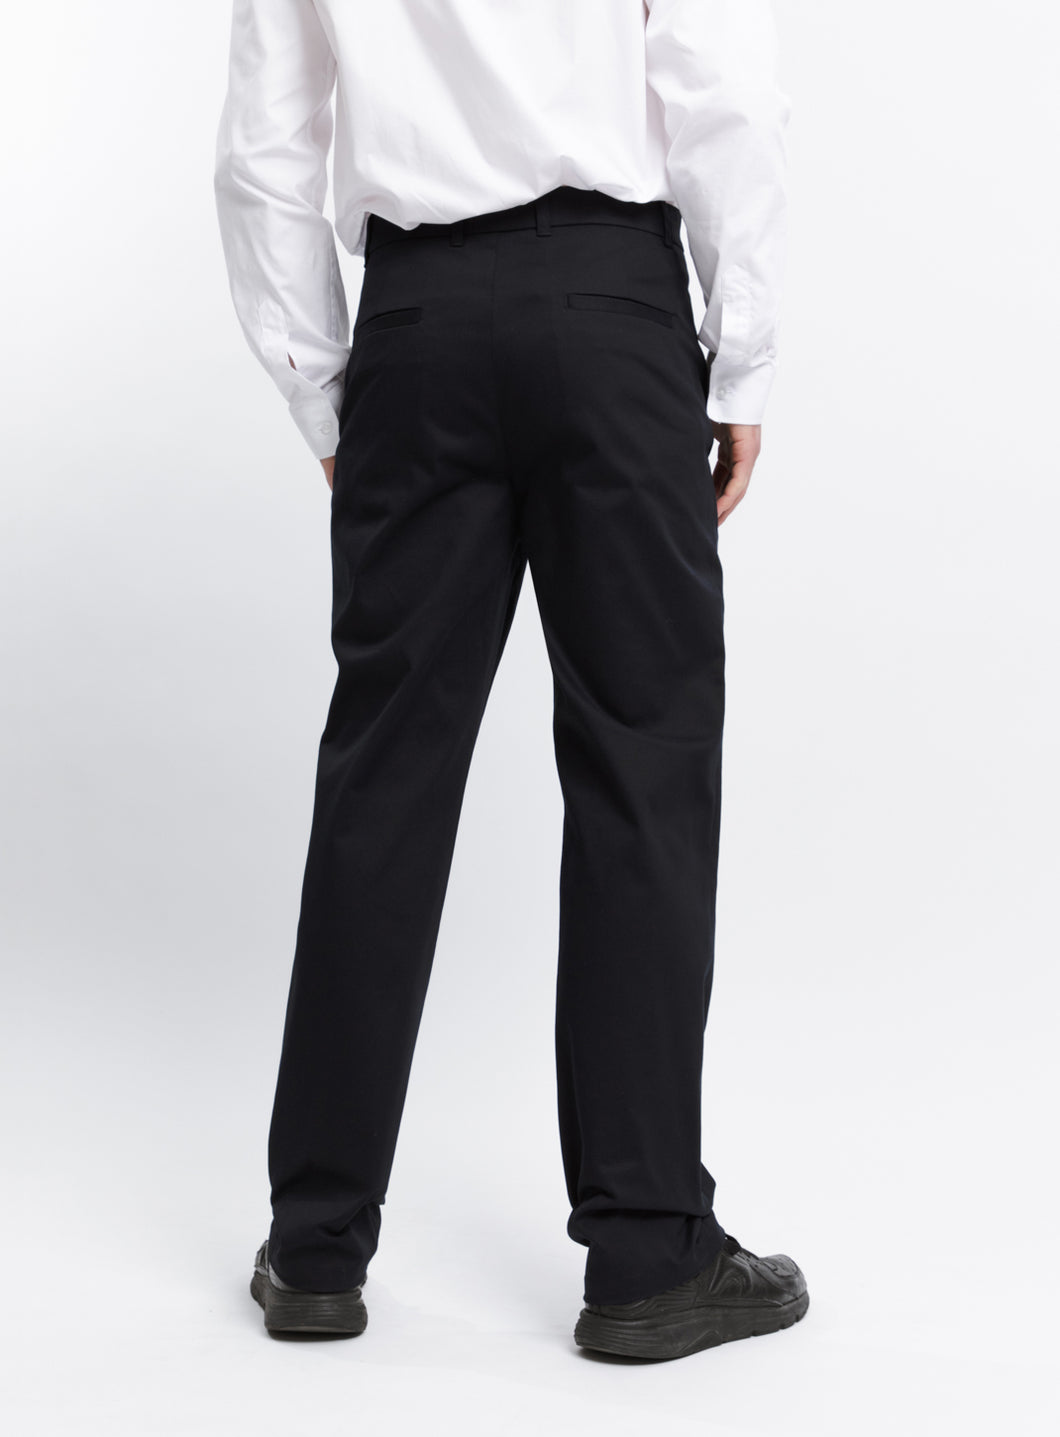 Pants with Piped Pockets in Navy Blue Cotton Gabardine